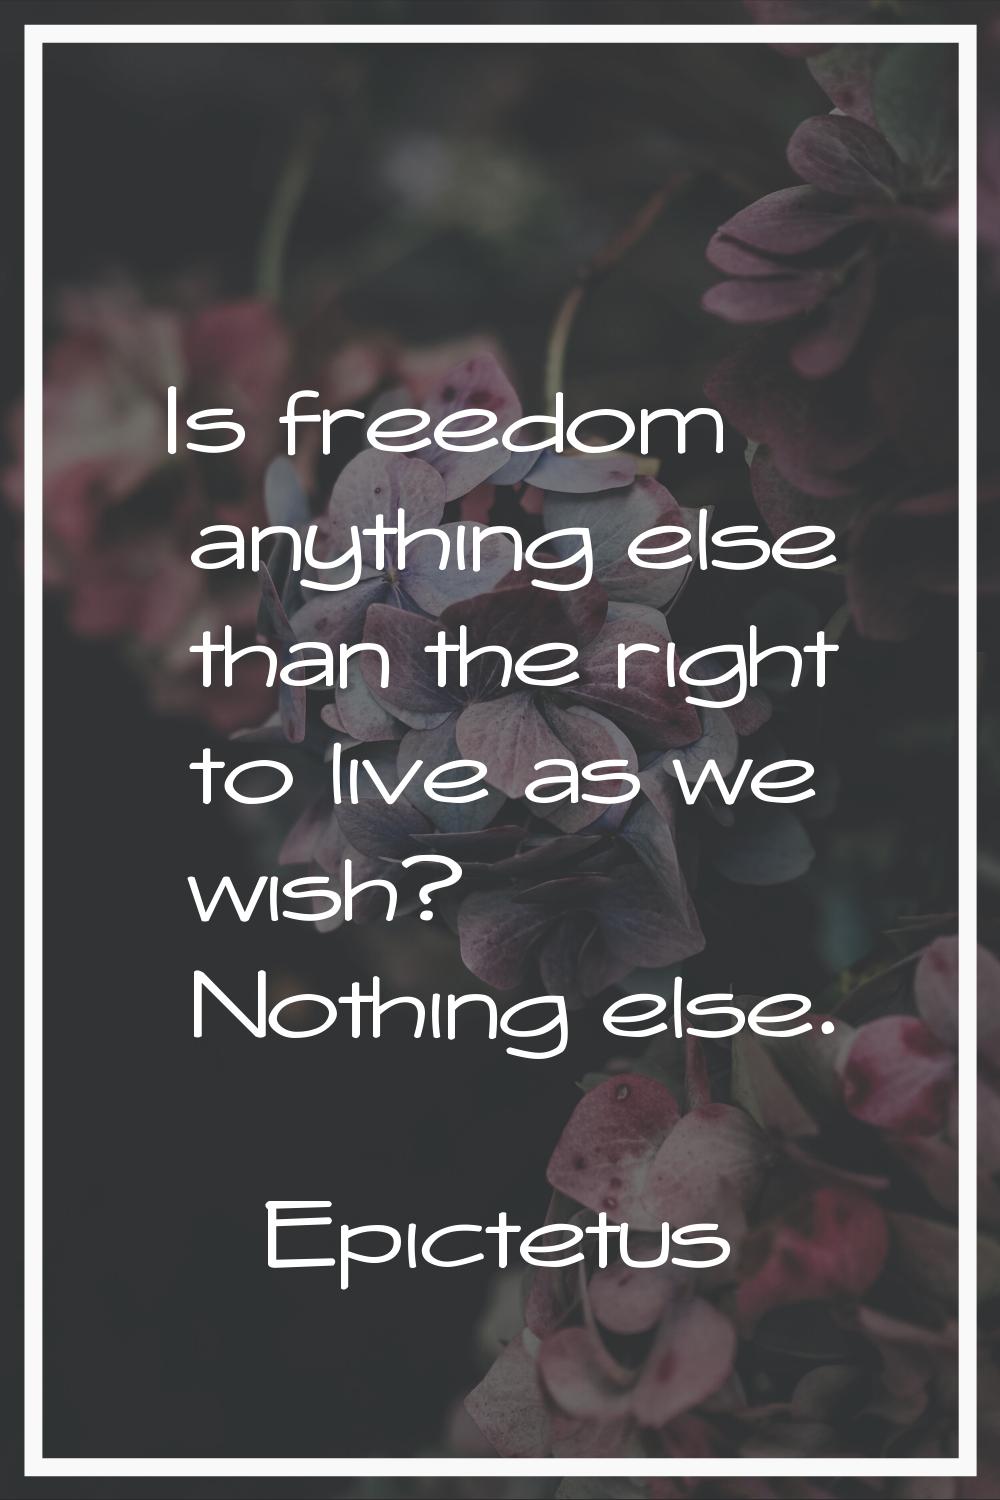 Is freedom anything else than the right to live as we wish? Nothing else.